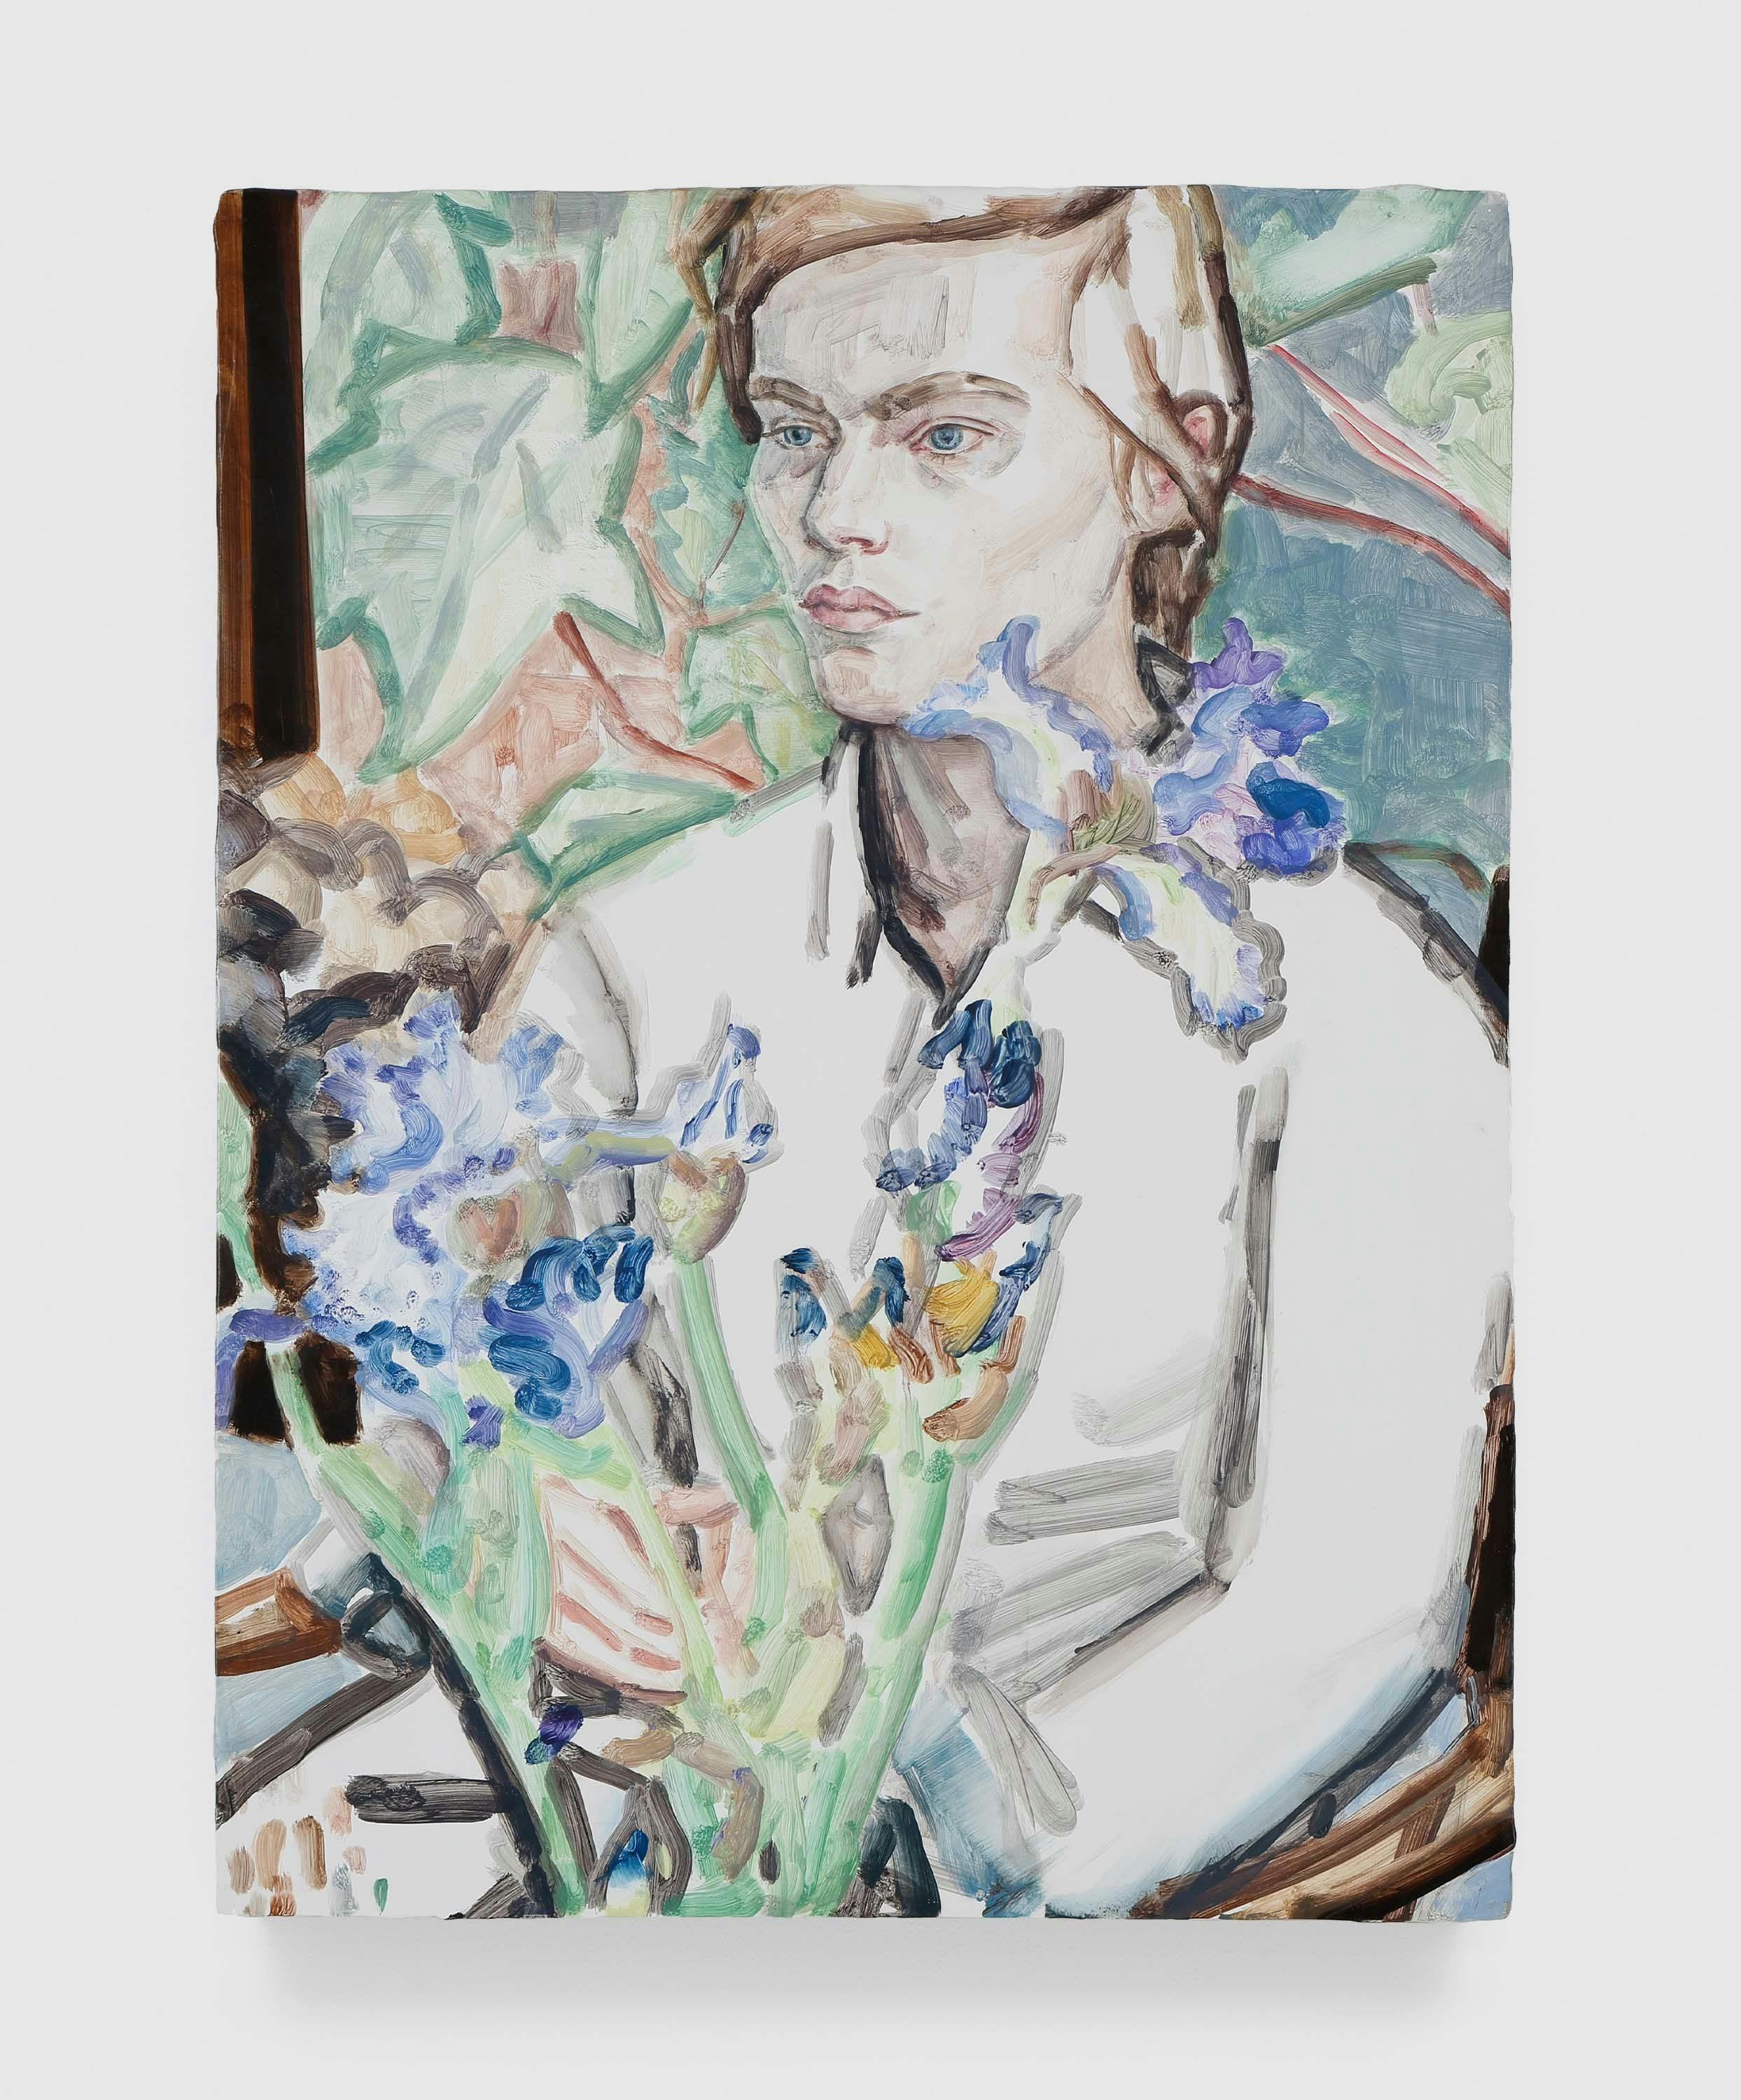 A painting by Elizabeth Peyton, titled Irises and Klara Commerce St., dated 2012.